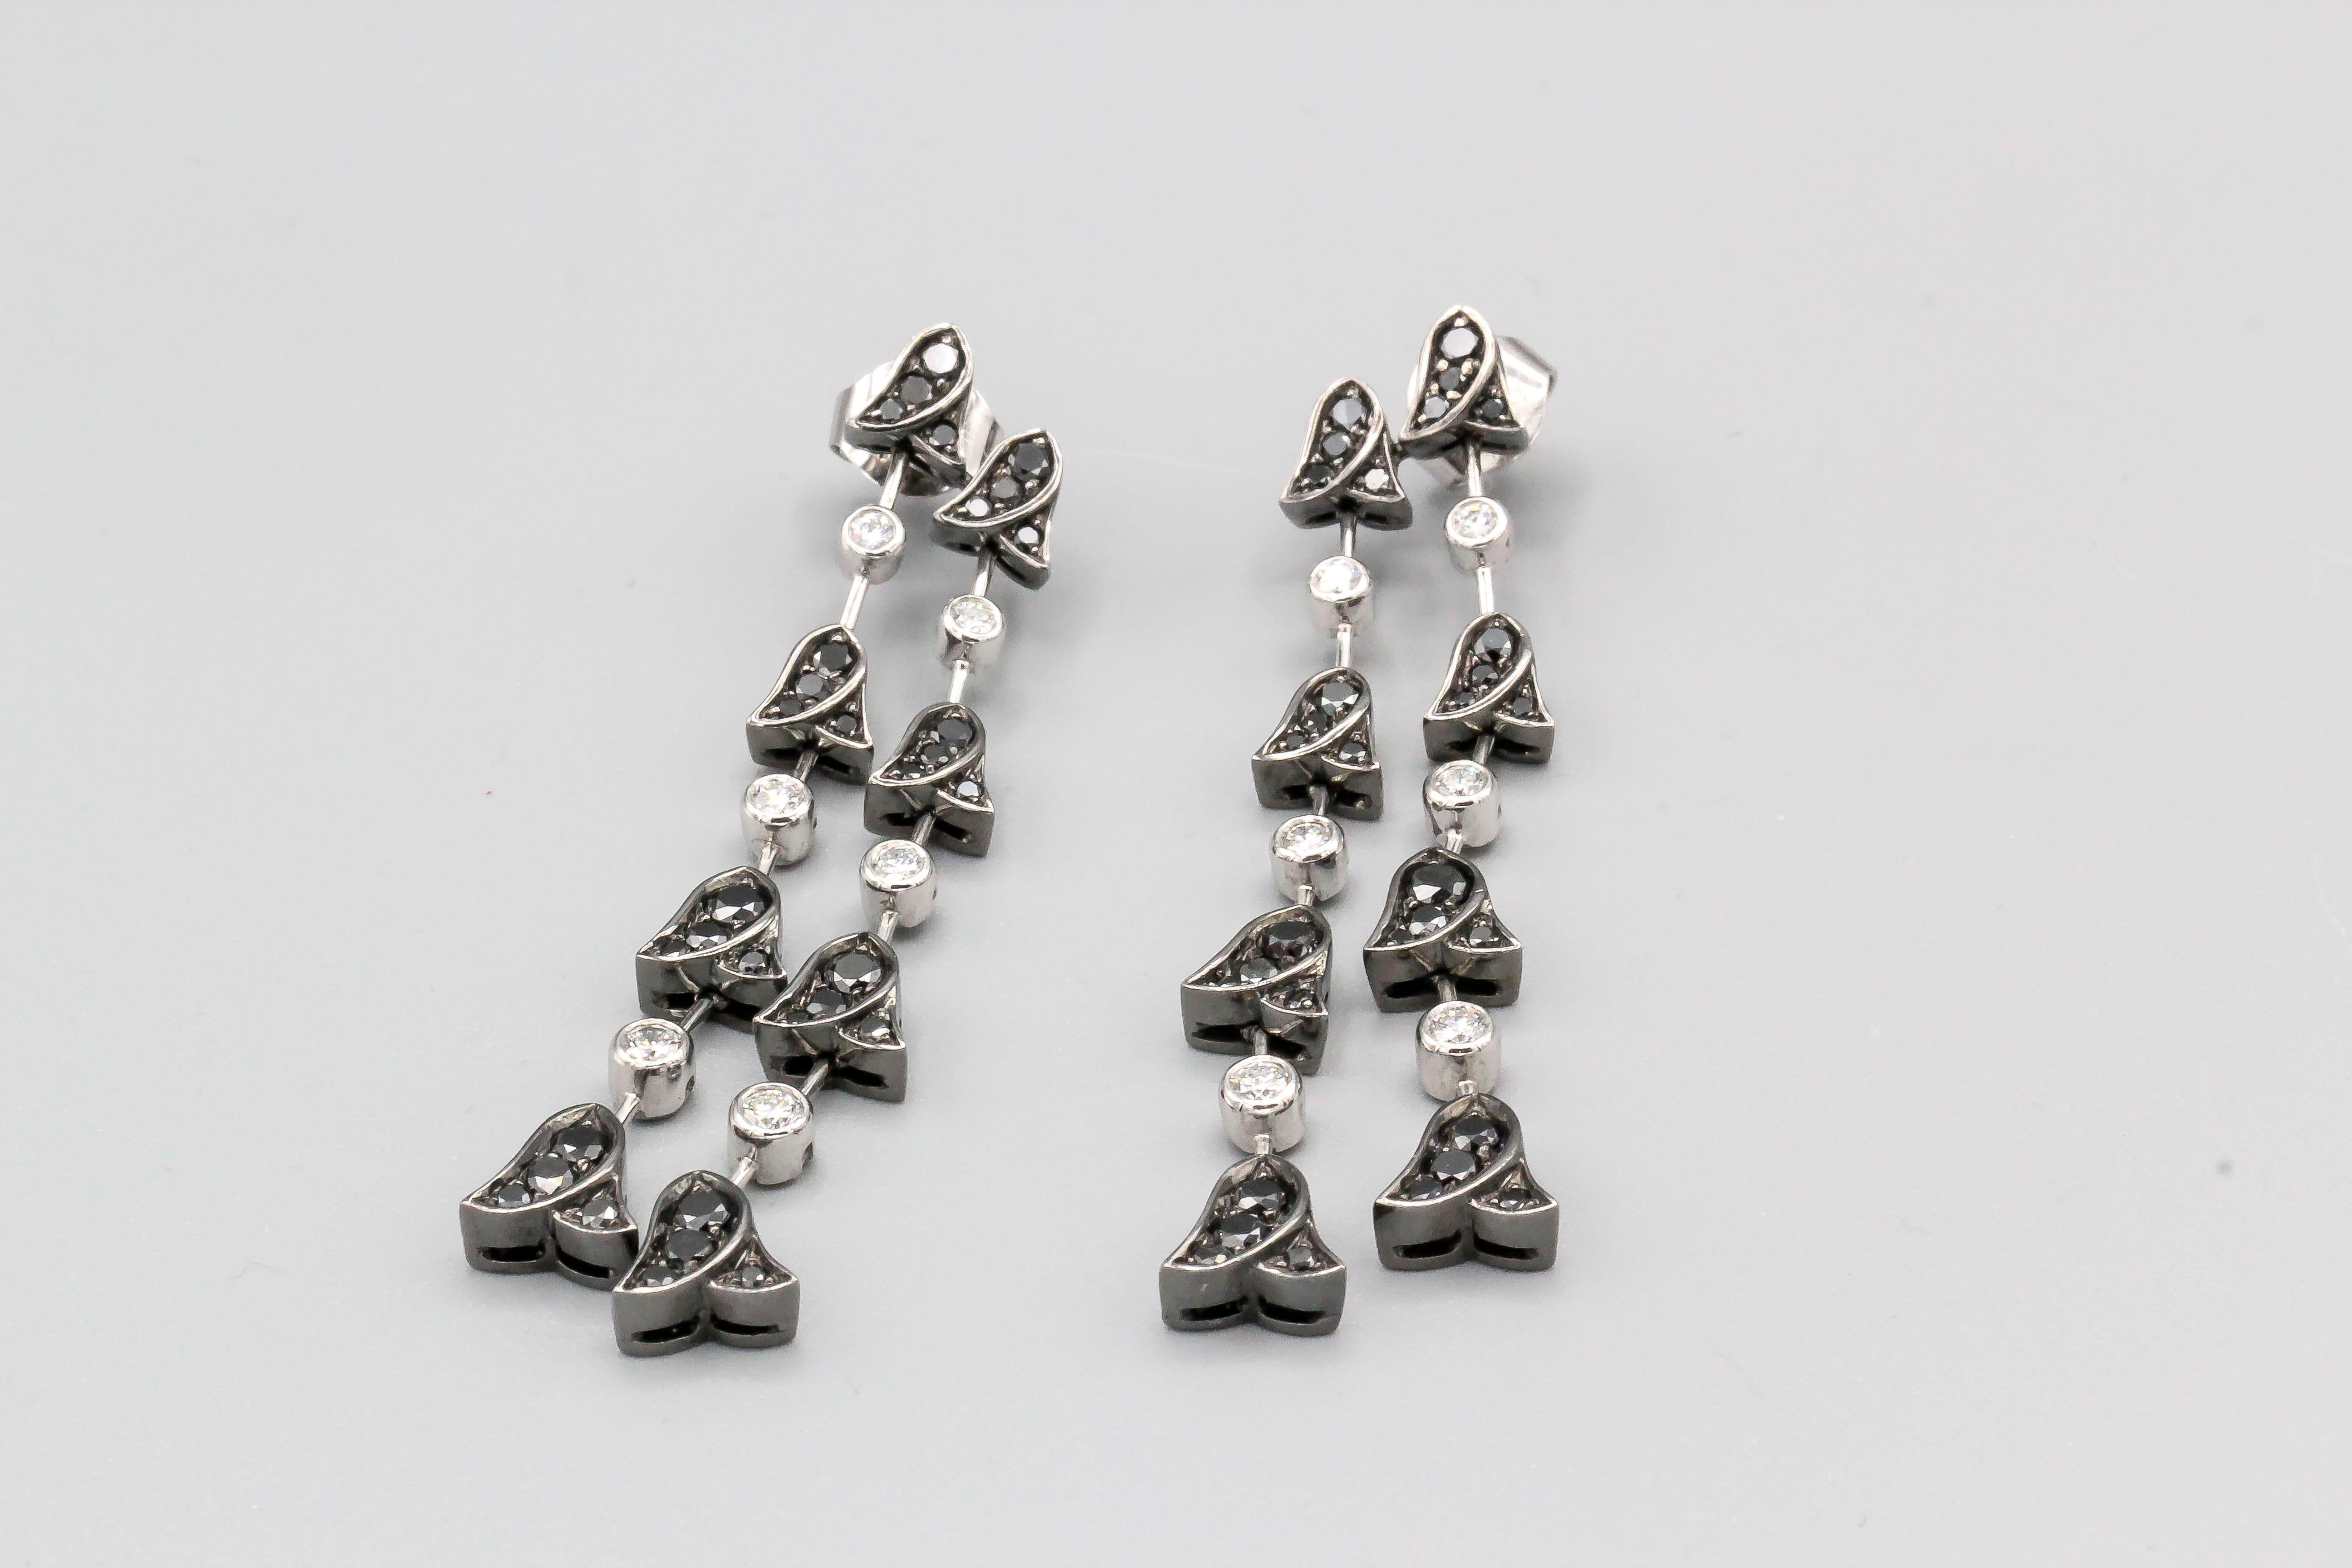 Fine pair of black and white diamond earrings, by Graff.  The earrings are designed as a series of hanging flowers.  Diamonds are all high grade round brilliant cut, and are set in white and blackened 18k gold. 

Hallmarks: Graff, 750, reference